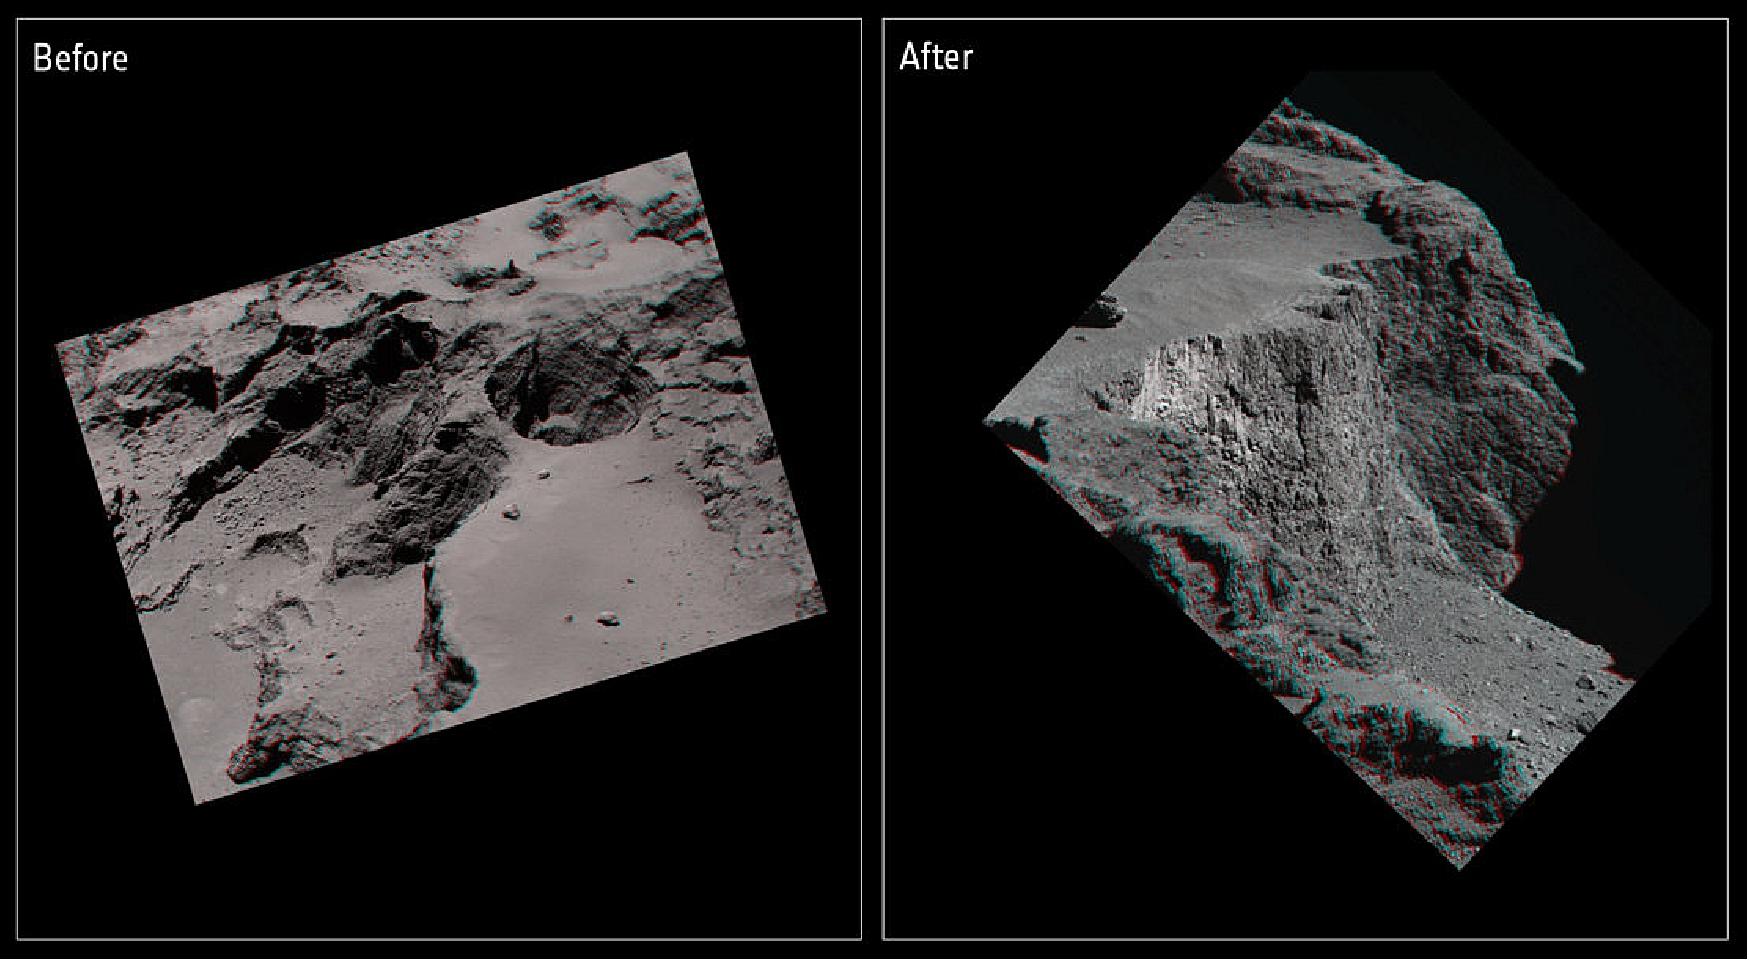 Figure 86: Comet cliff collapse in 3D. Anaglyph images of the Aswan cliff showing the overhang before (left) and after (right) it collapsed. The anaglyph images were prepared for evaluating the volume of overhang that detached in July 2015. Note the orientation between the two images is different (image credit: ESA/Rosetta/MPS for OSIRIS Team MPS/UPD/LAM/IAA/SSO/INTA/UPM/DASP/IDA; M. Pajola)